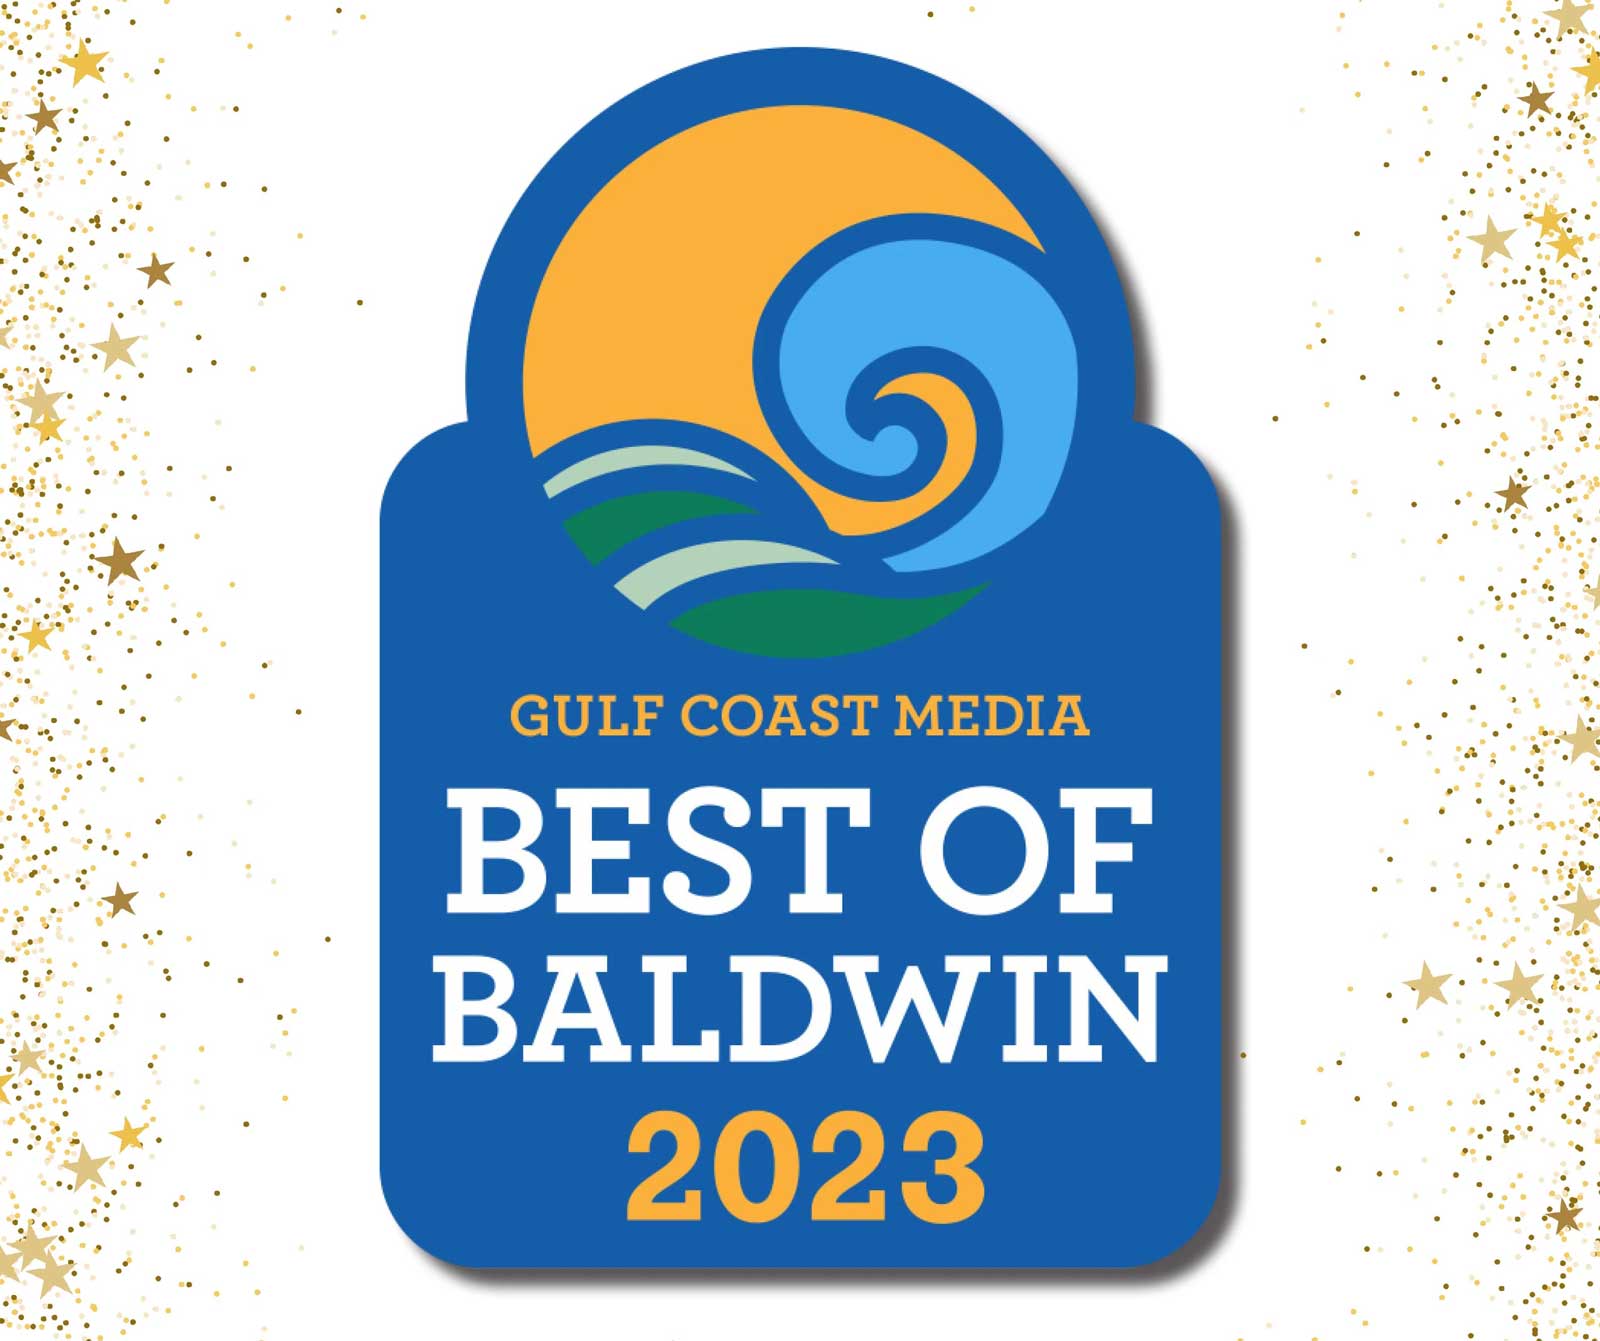 Best Of Baldwin Sees Record Voting, Announces Winners